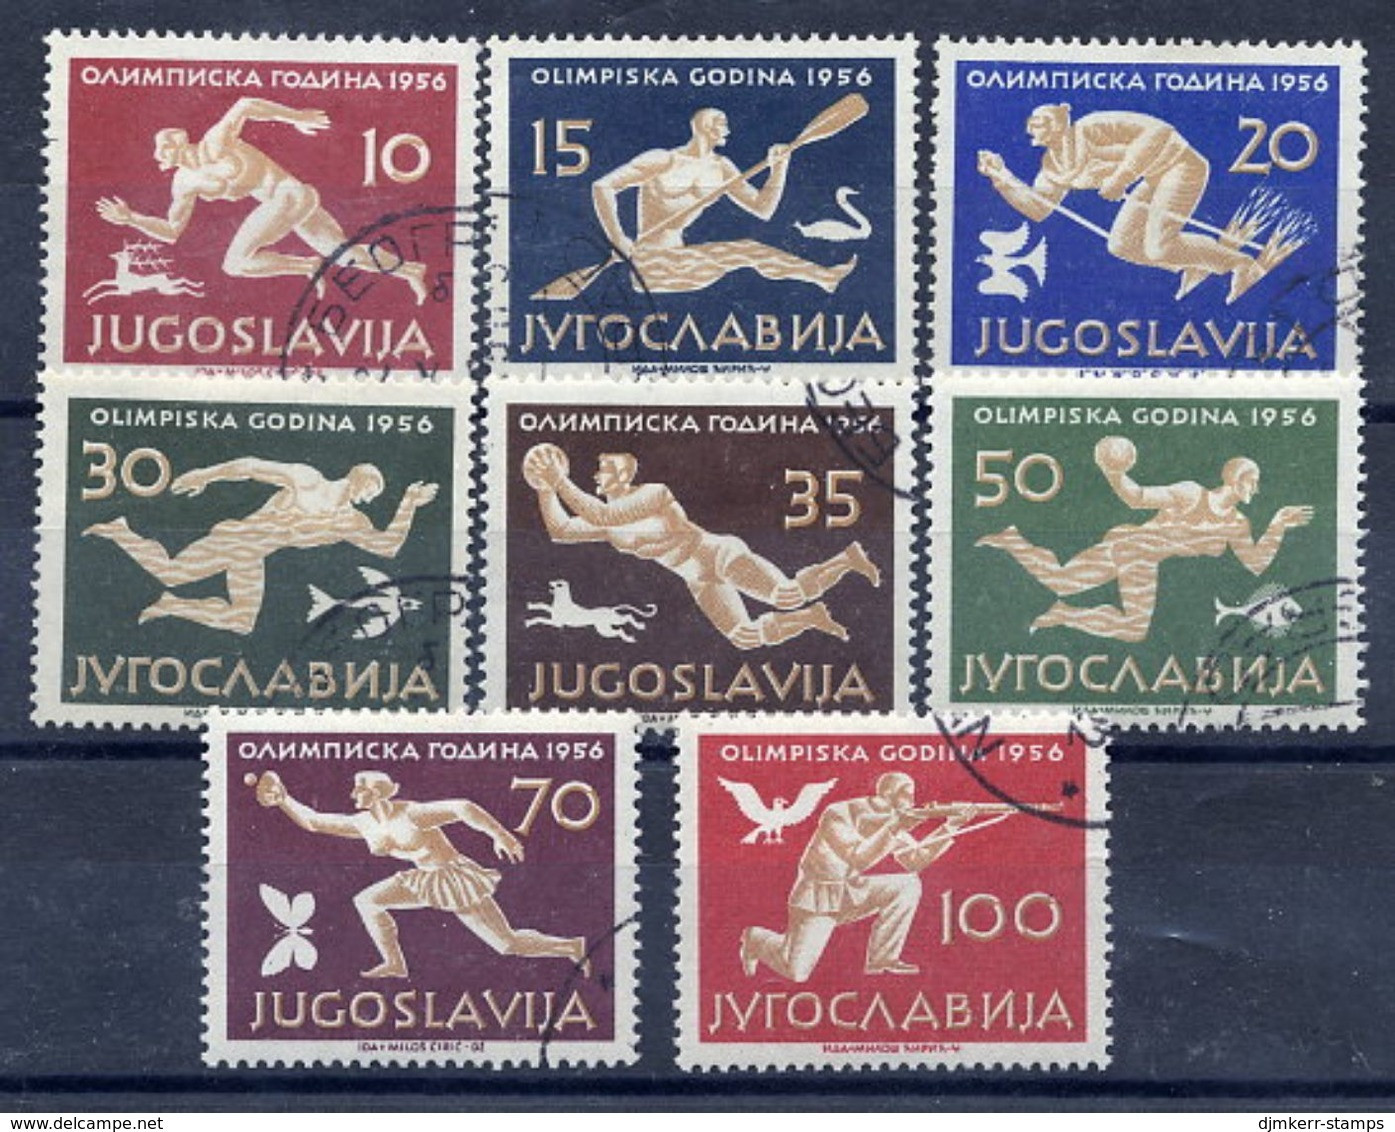 YUGOSLAVIA 1956 Olympic Games, Used.  Michel 804-11 - Used Stamps